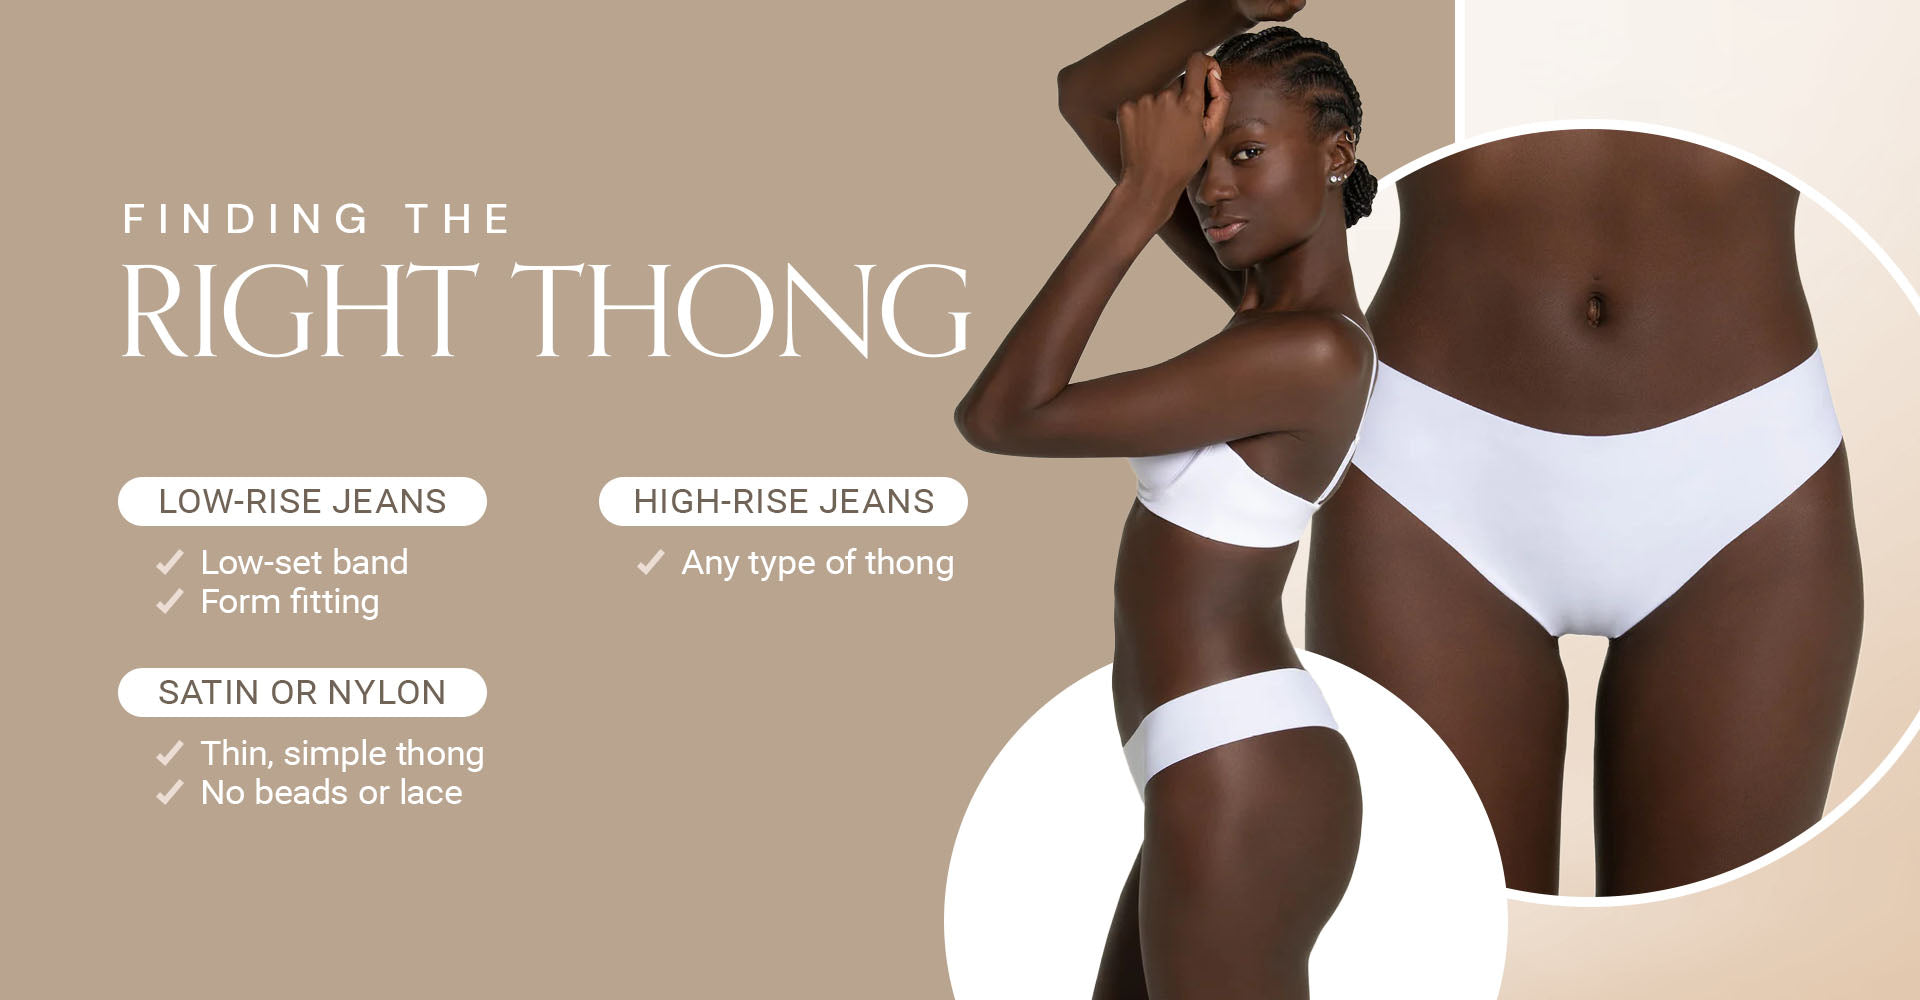 Finding the right thong